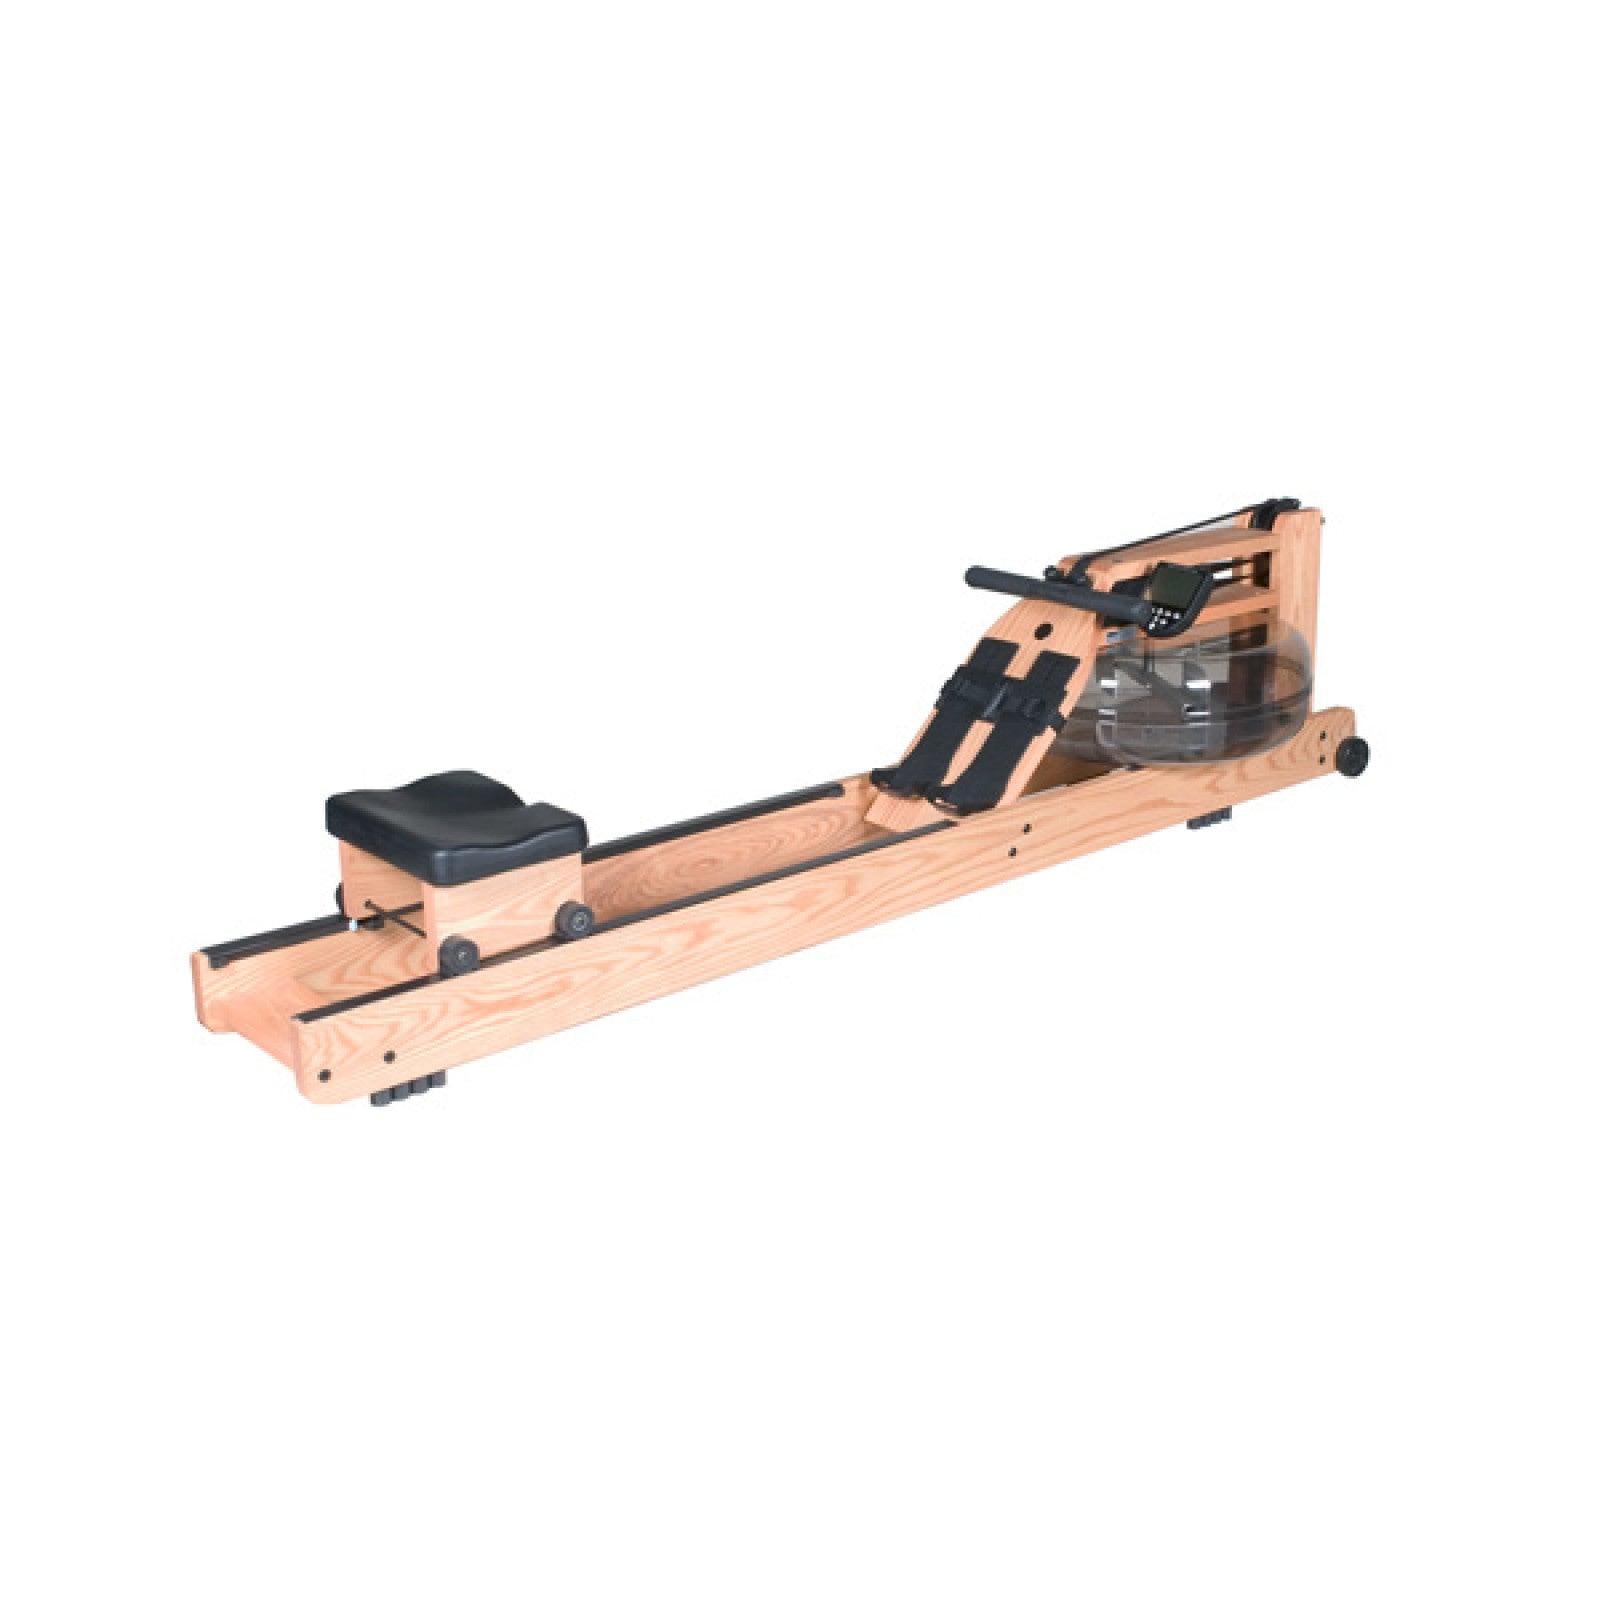 Ashwood Waterrower With Computer - In Store For You To Try